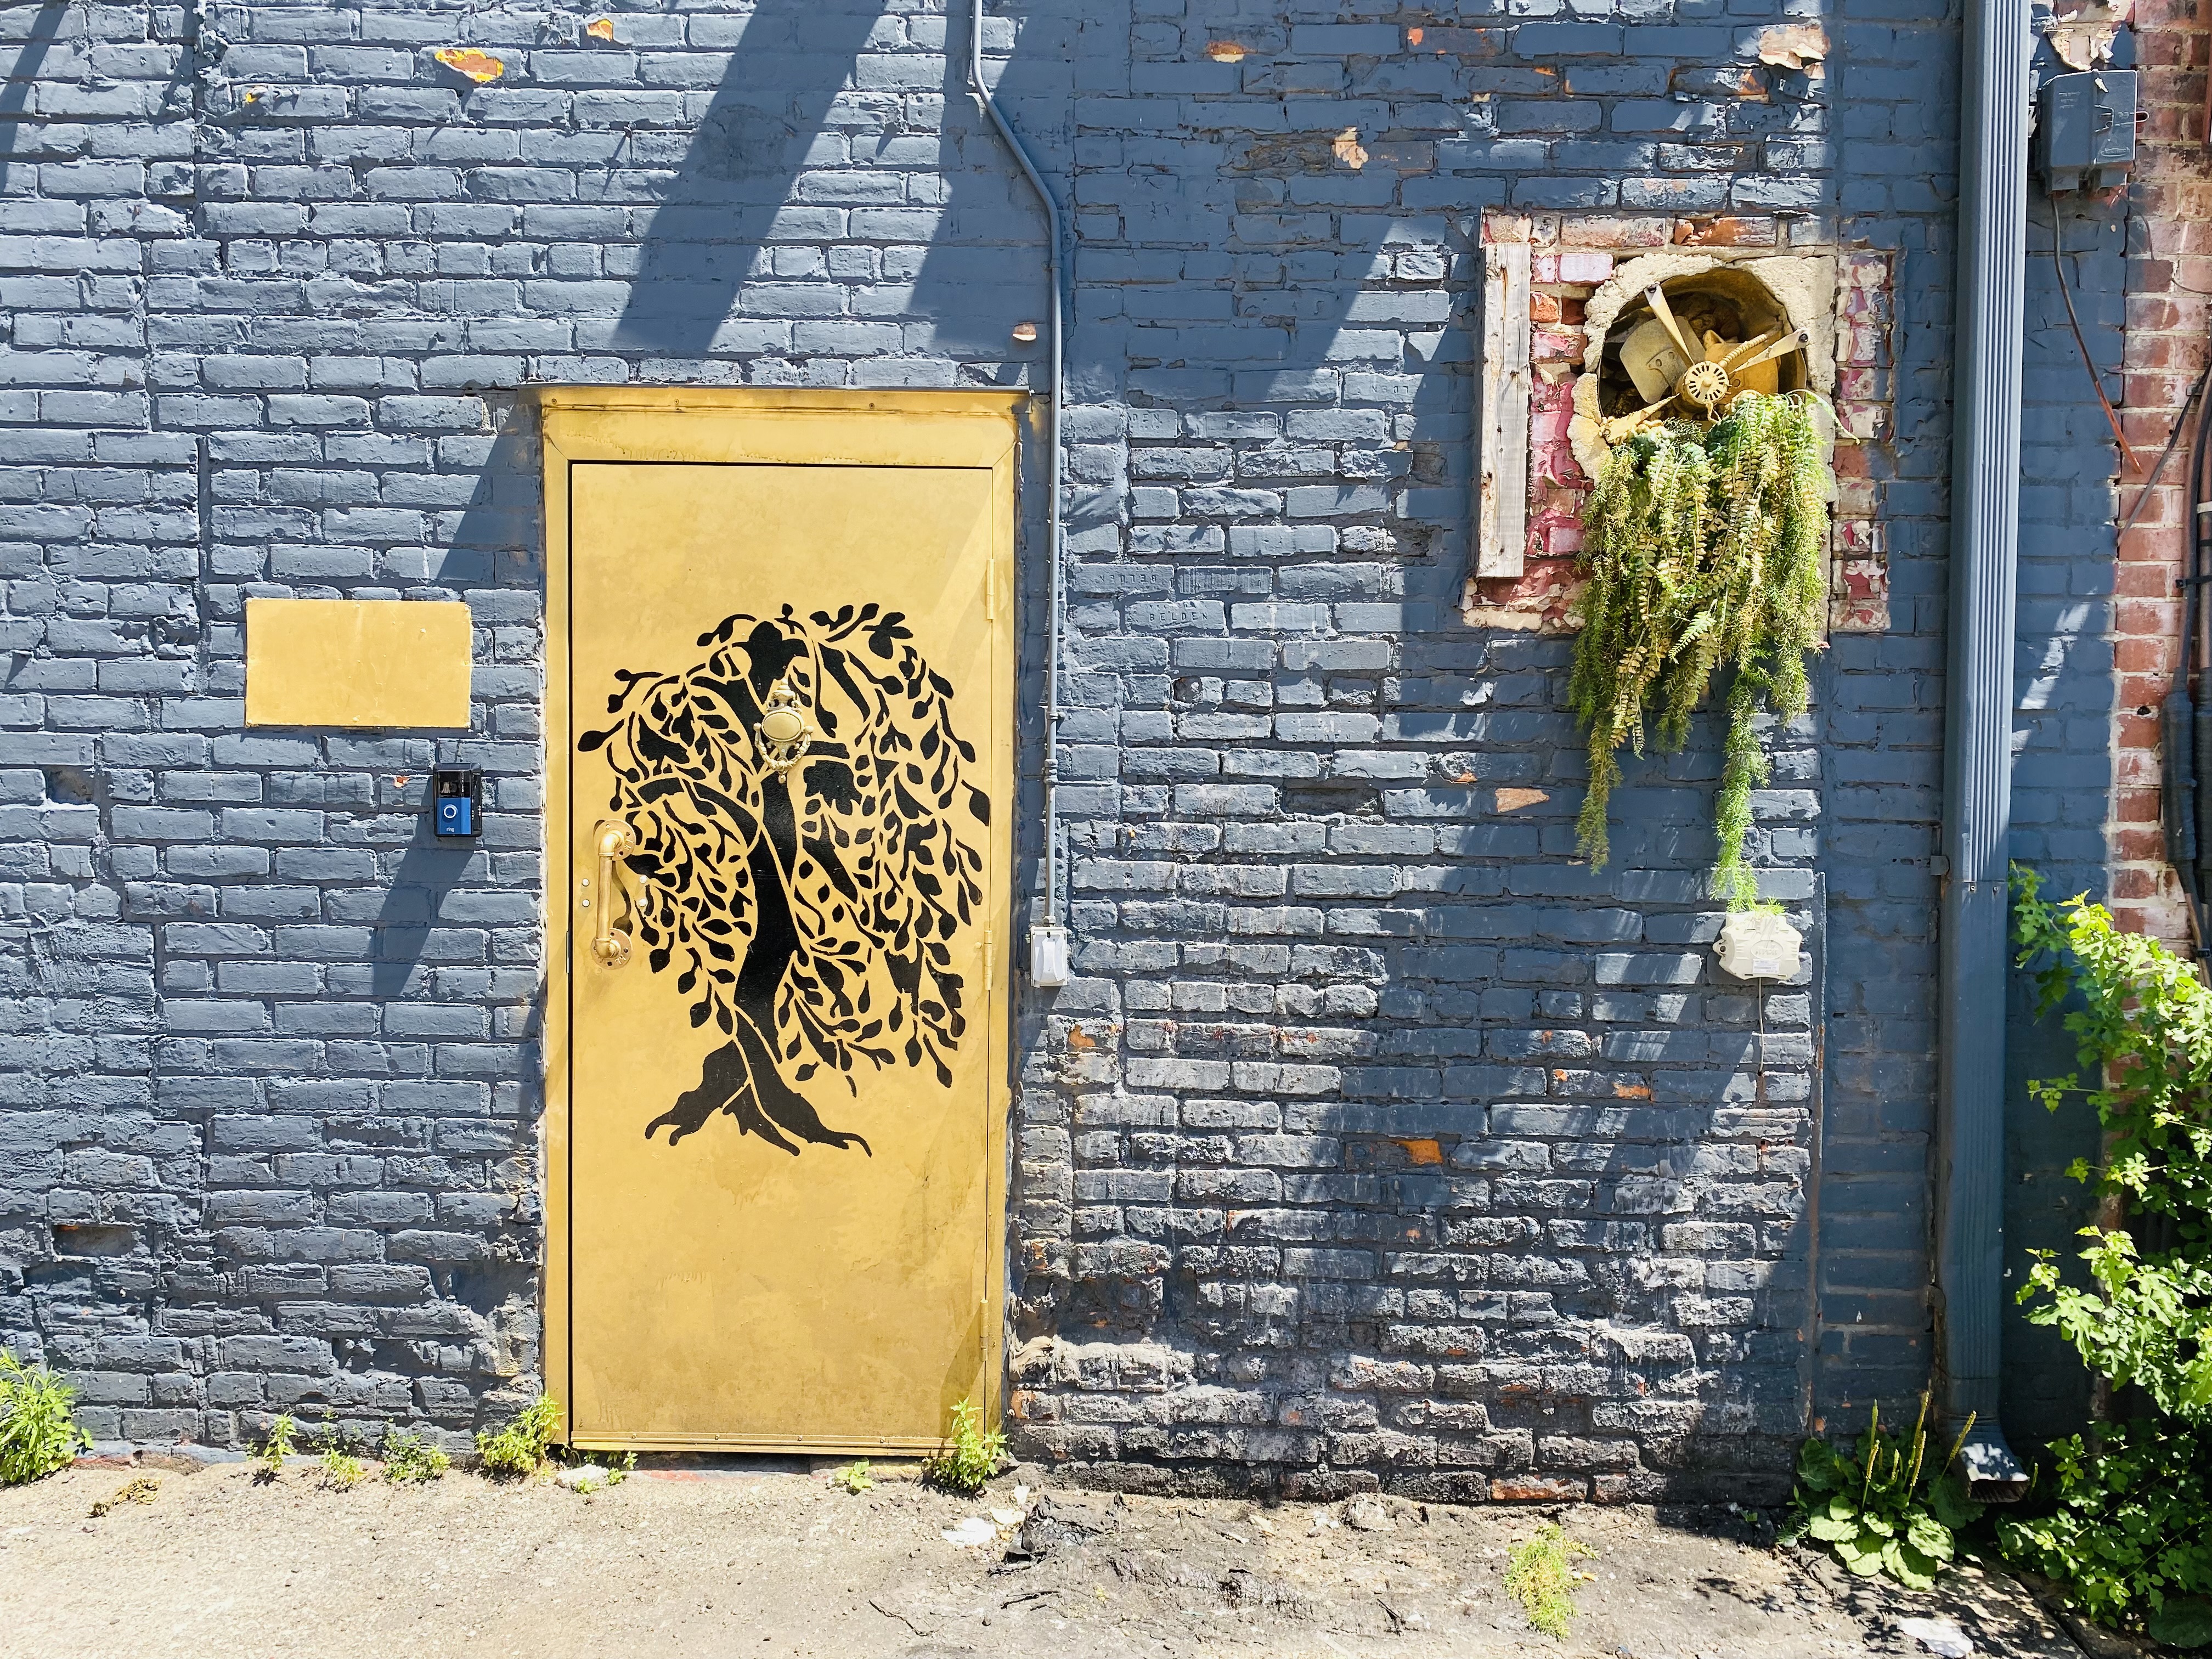 A golden door with a black willow tree silhouette painted on it against a blue gray brick wall in an alley in downtown Detroit